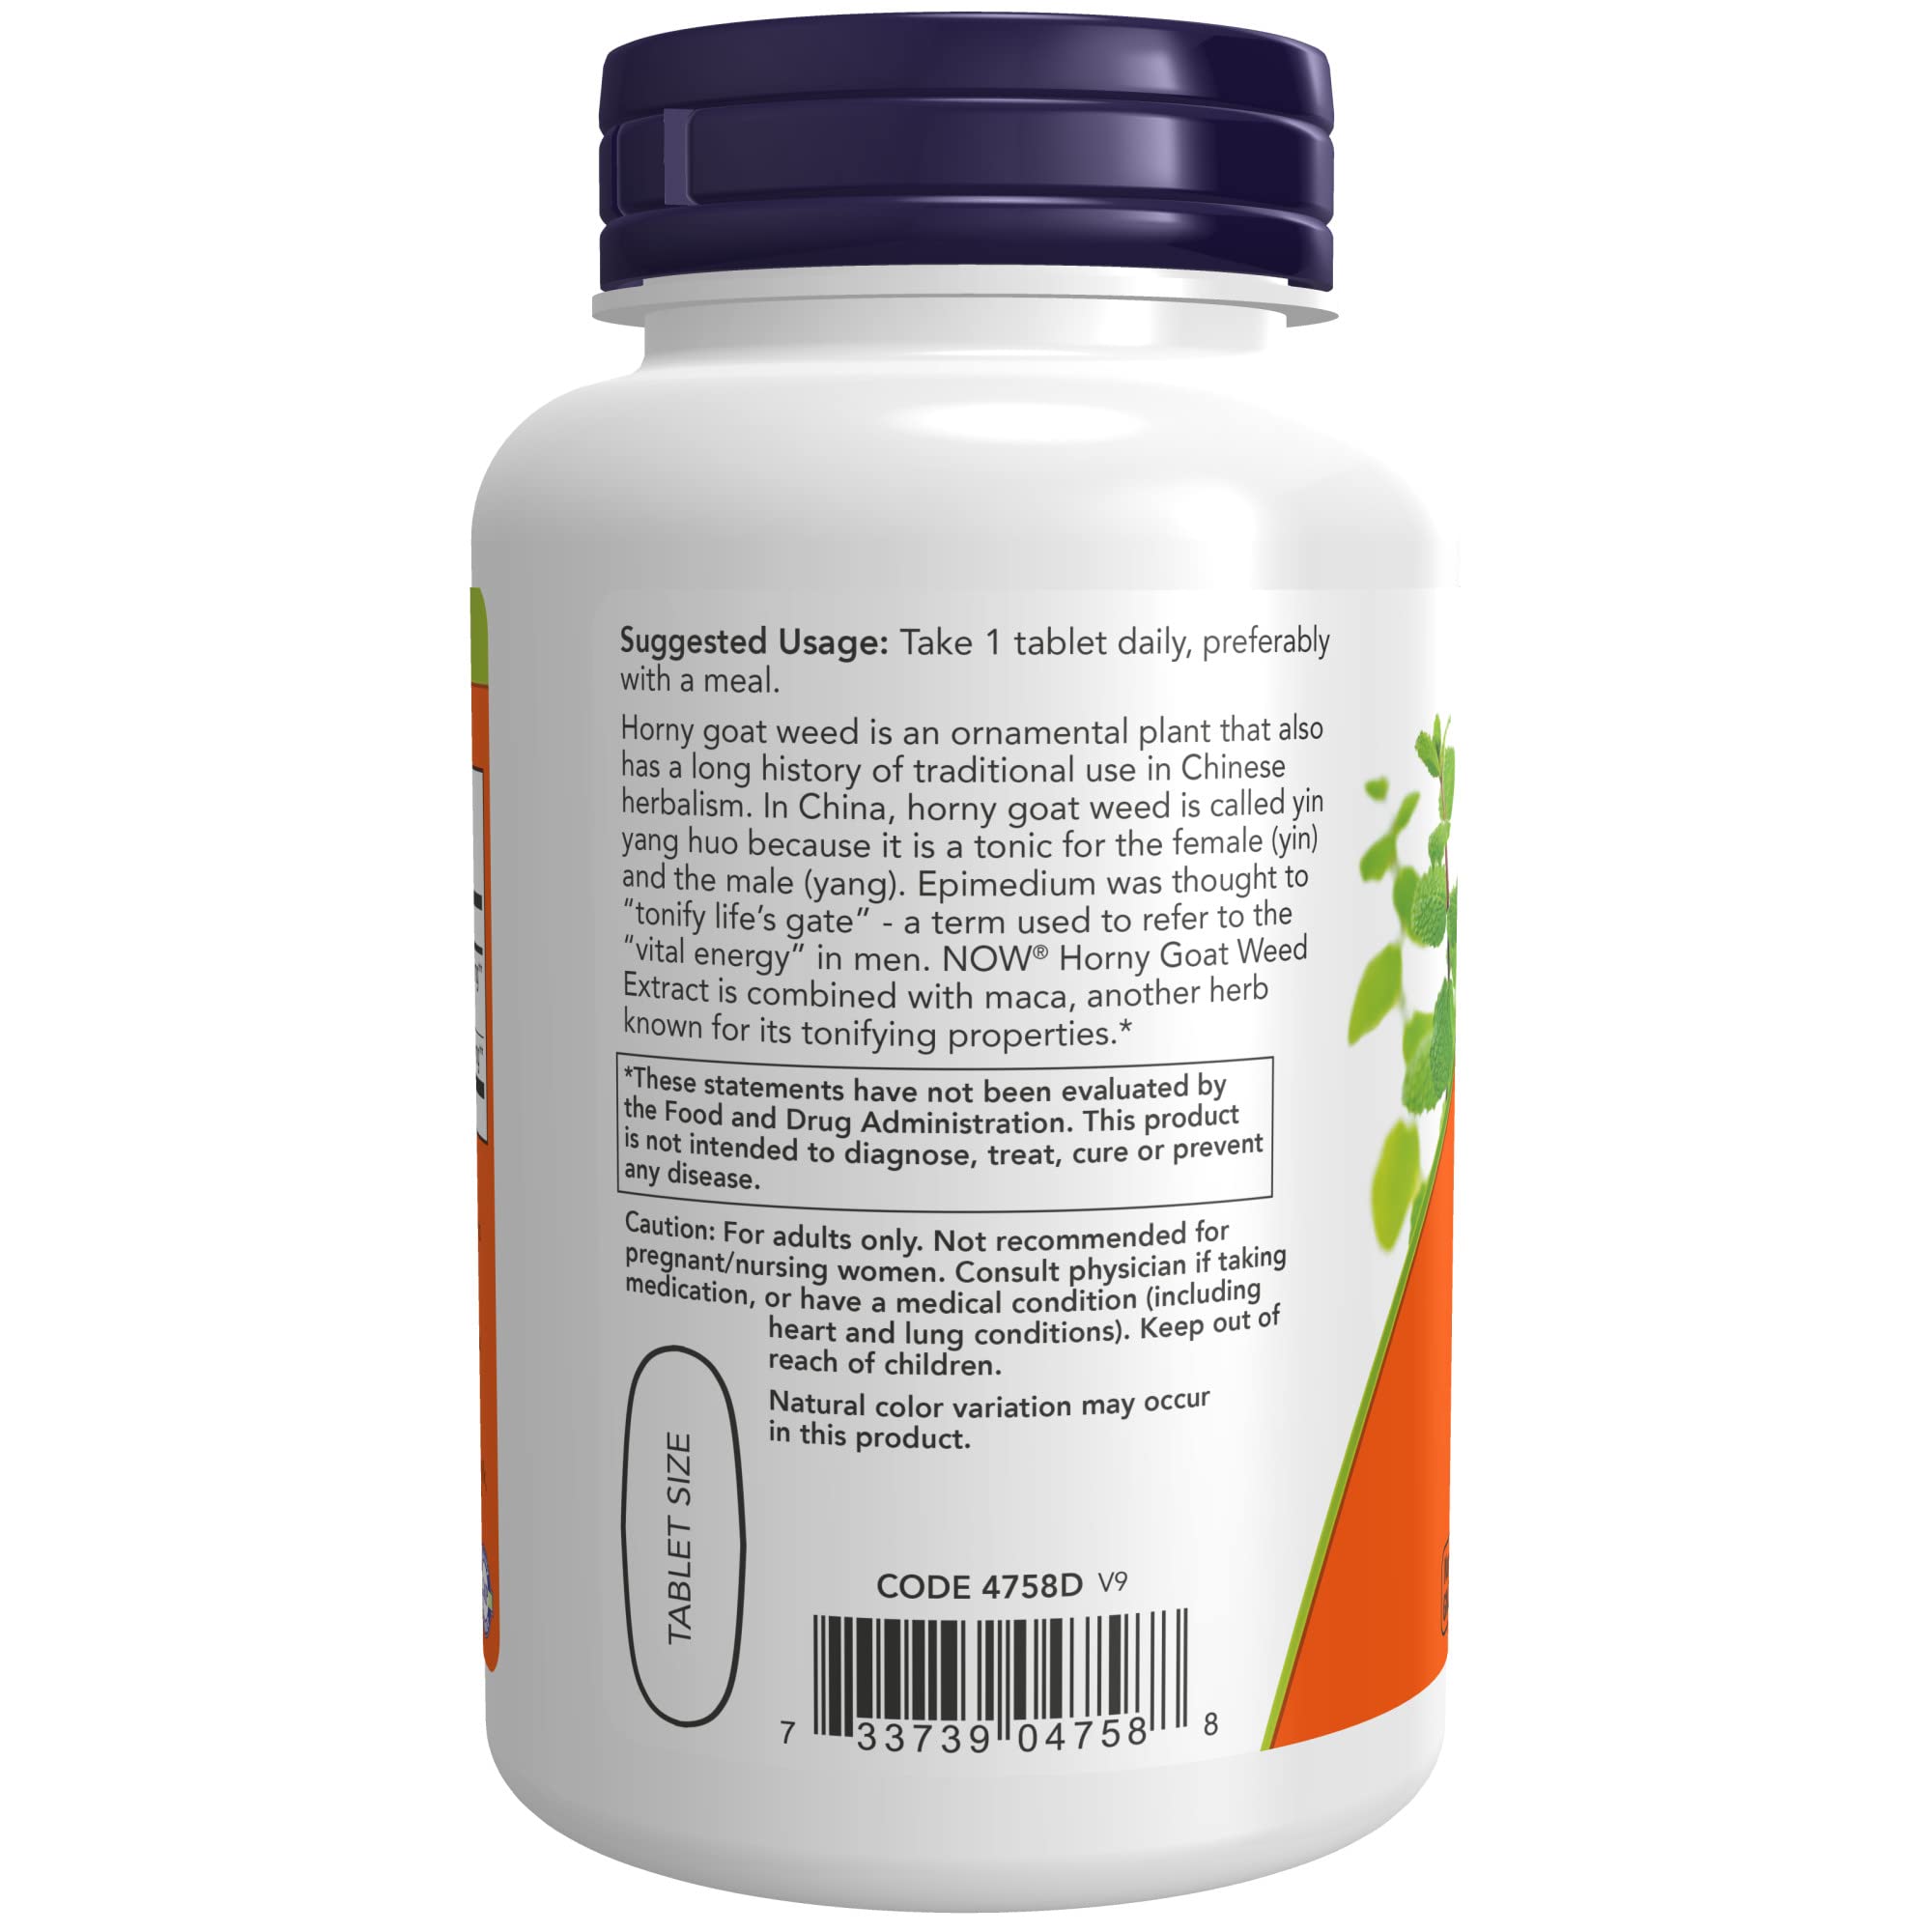 NOW Supplements, Horny Goat Weed Extract 750 mg Plus 150 mg of Maca Root, Tonifying Herb*, 90 Tablets, for Sexual Health